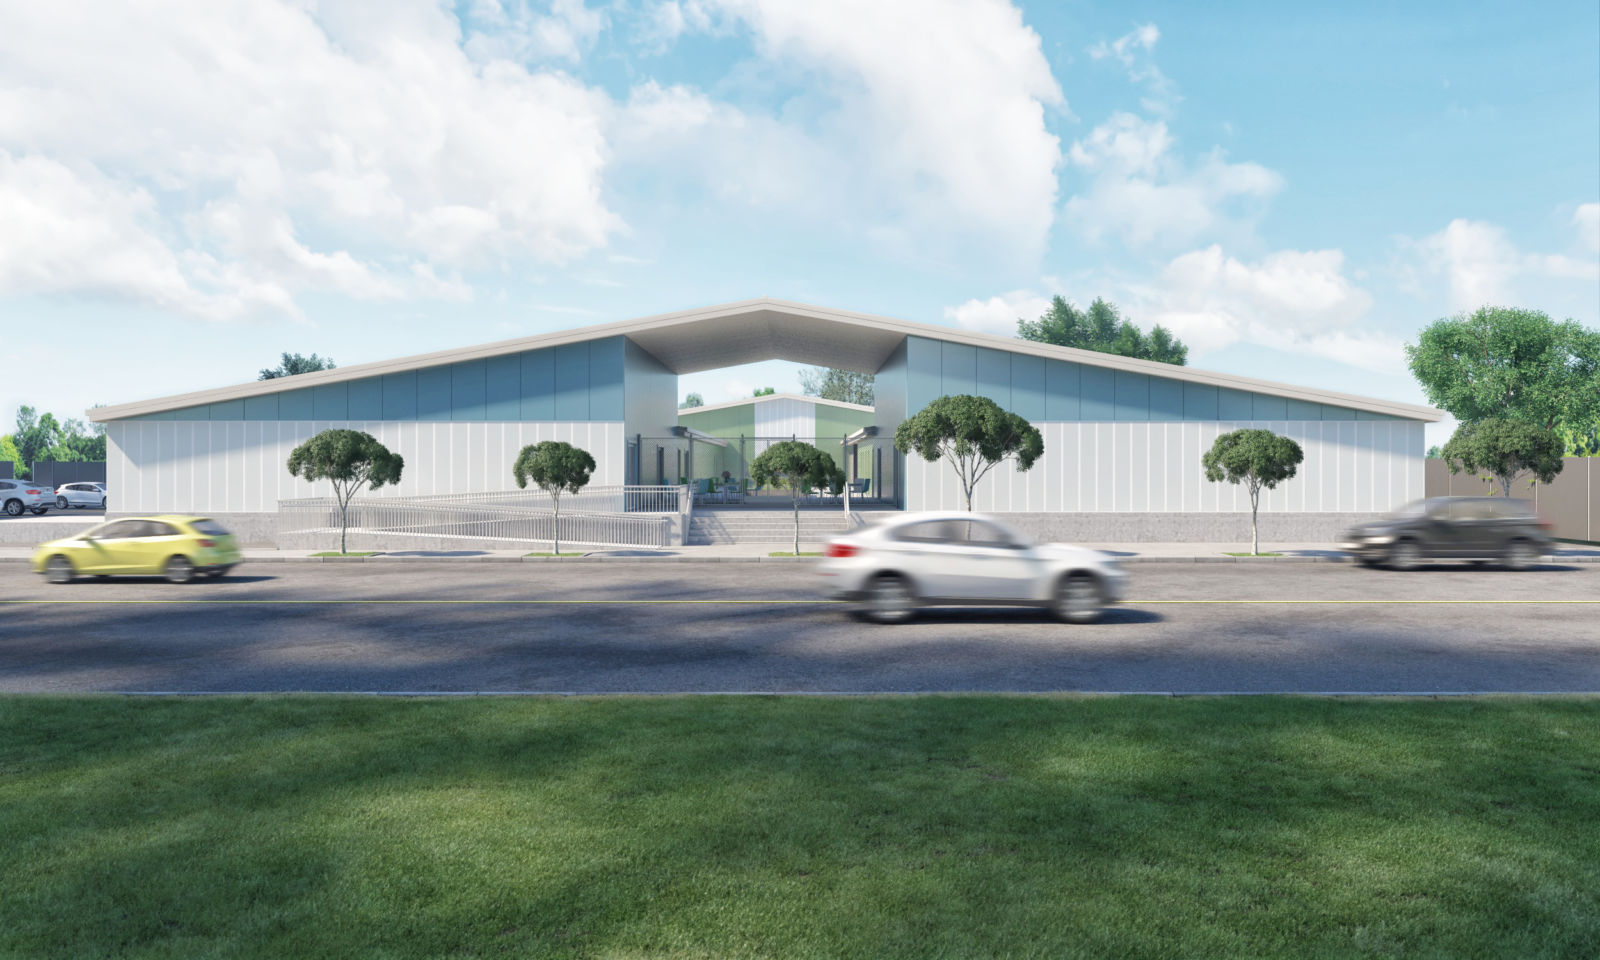 prefabricated steel building from EcoSteel to provide a solution for LA Shelter